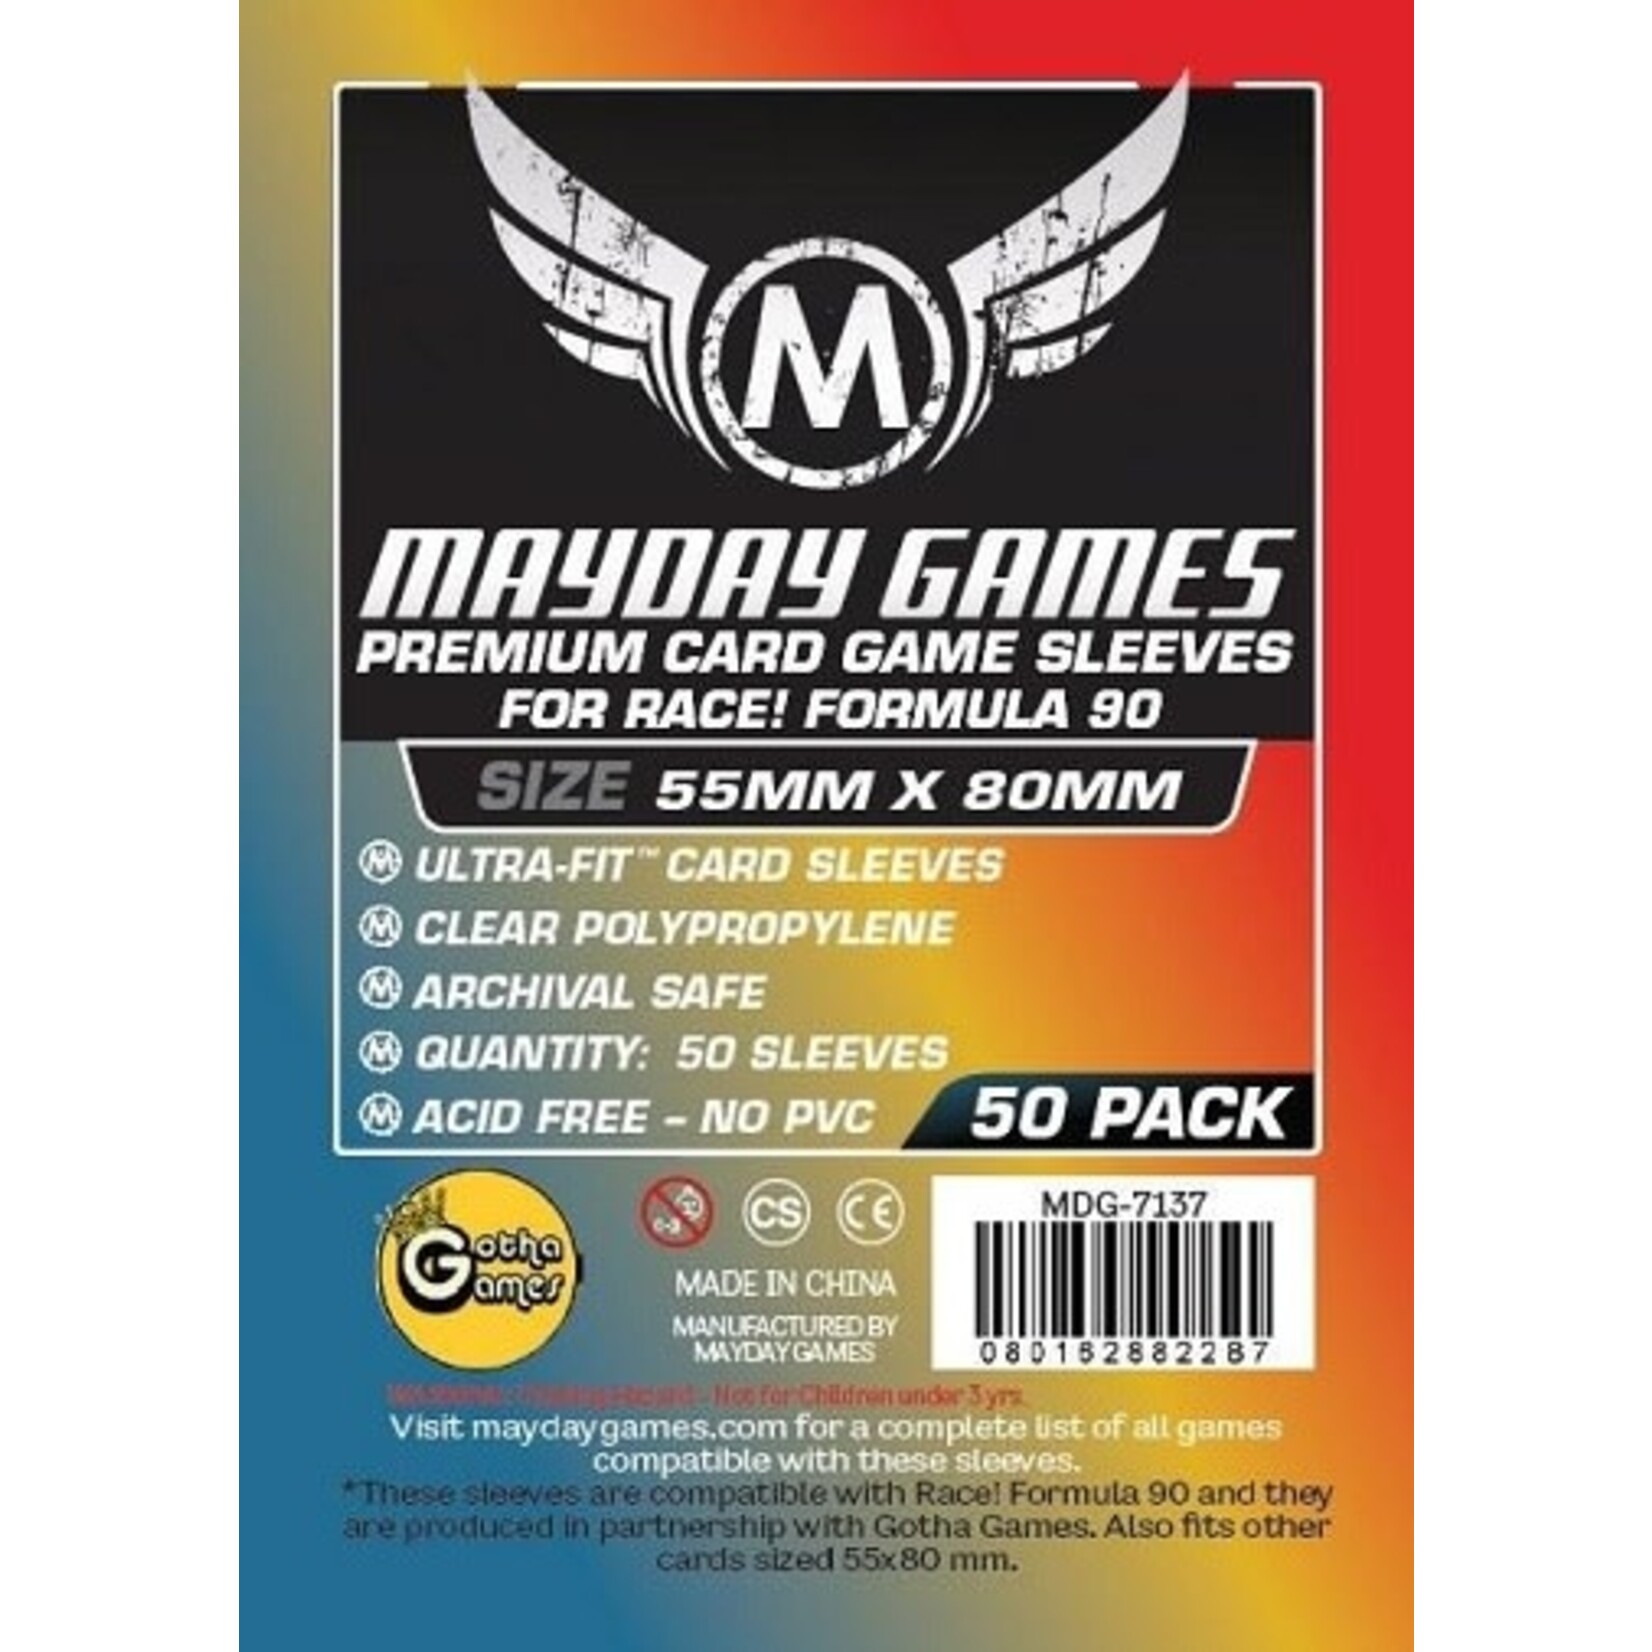 Mayday Games Premium Card Sleeves 55mm x 80mm